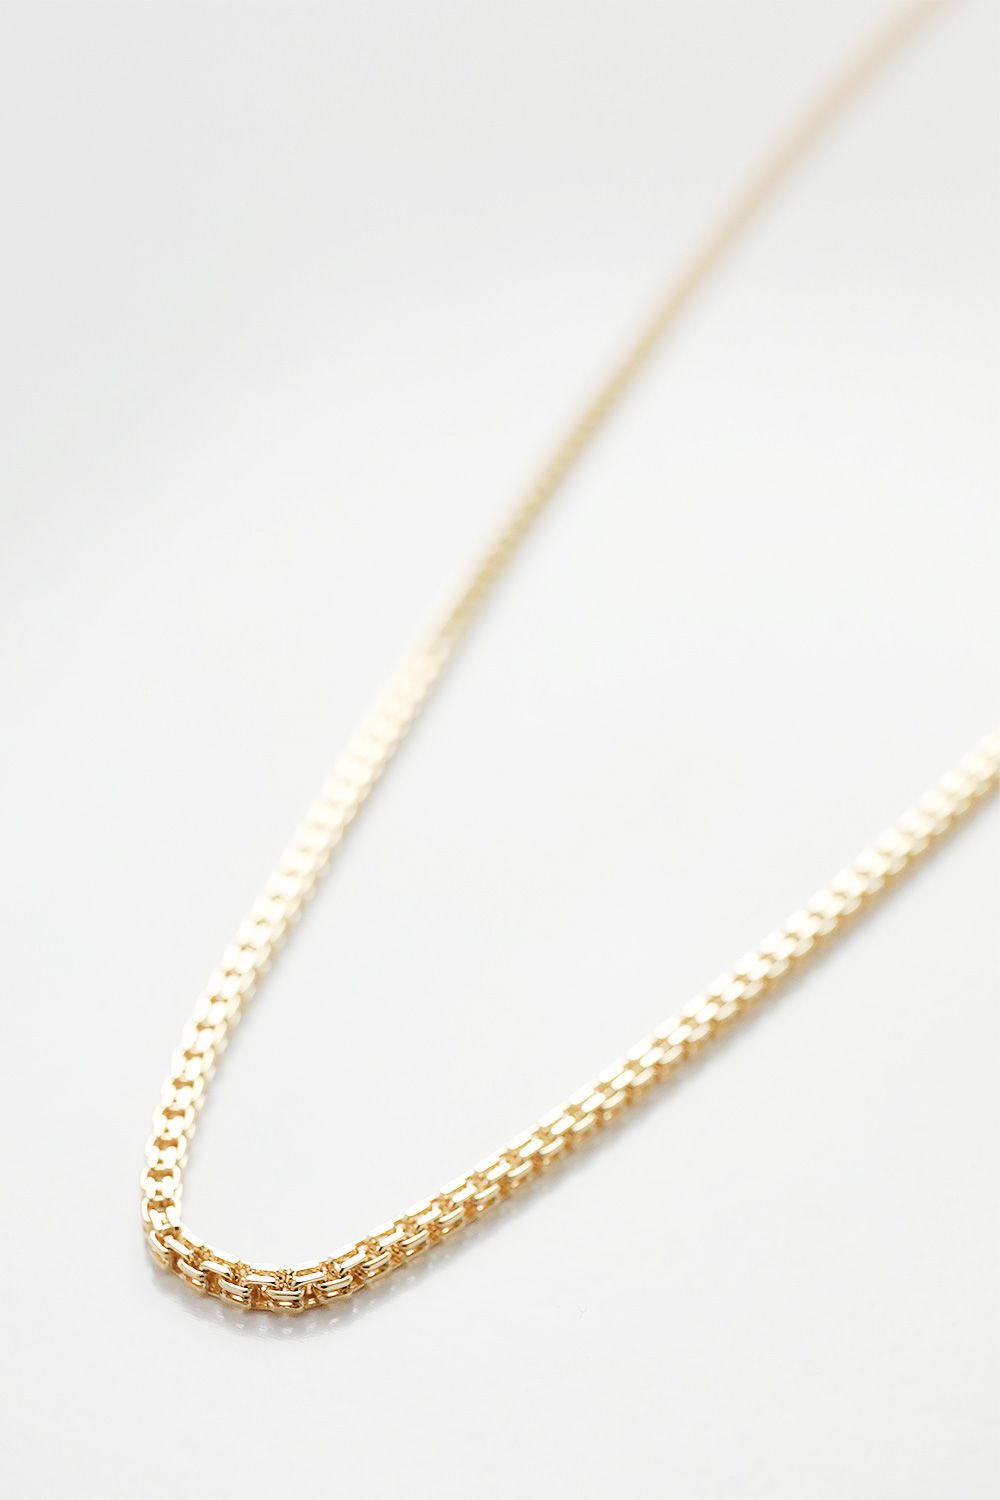 WEWILL - VENETIAN CHAIN NECKLACE(GOLD) | Acacia ONLINESTORE